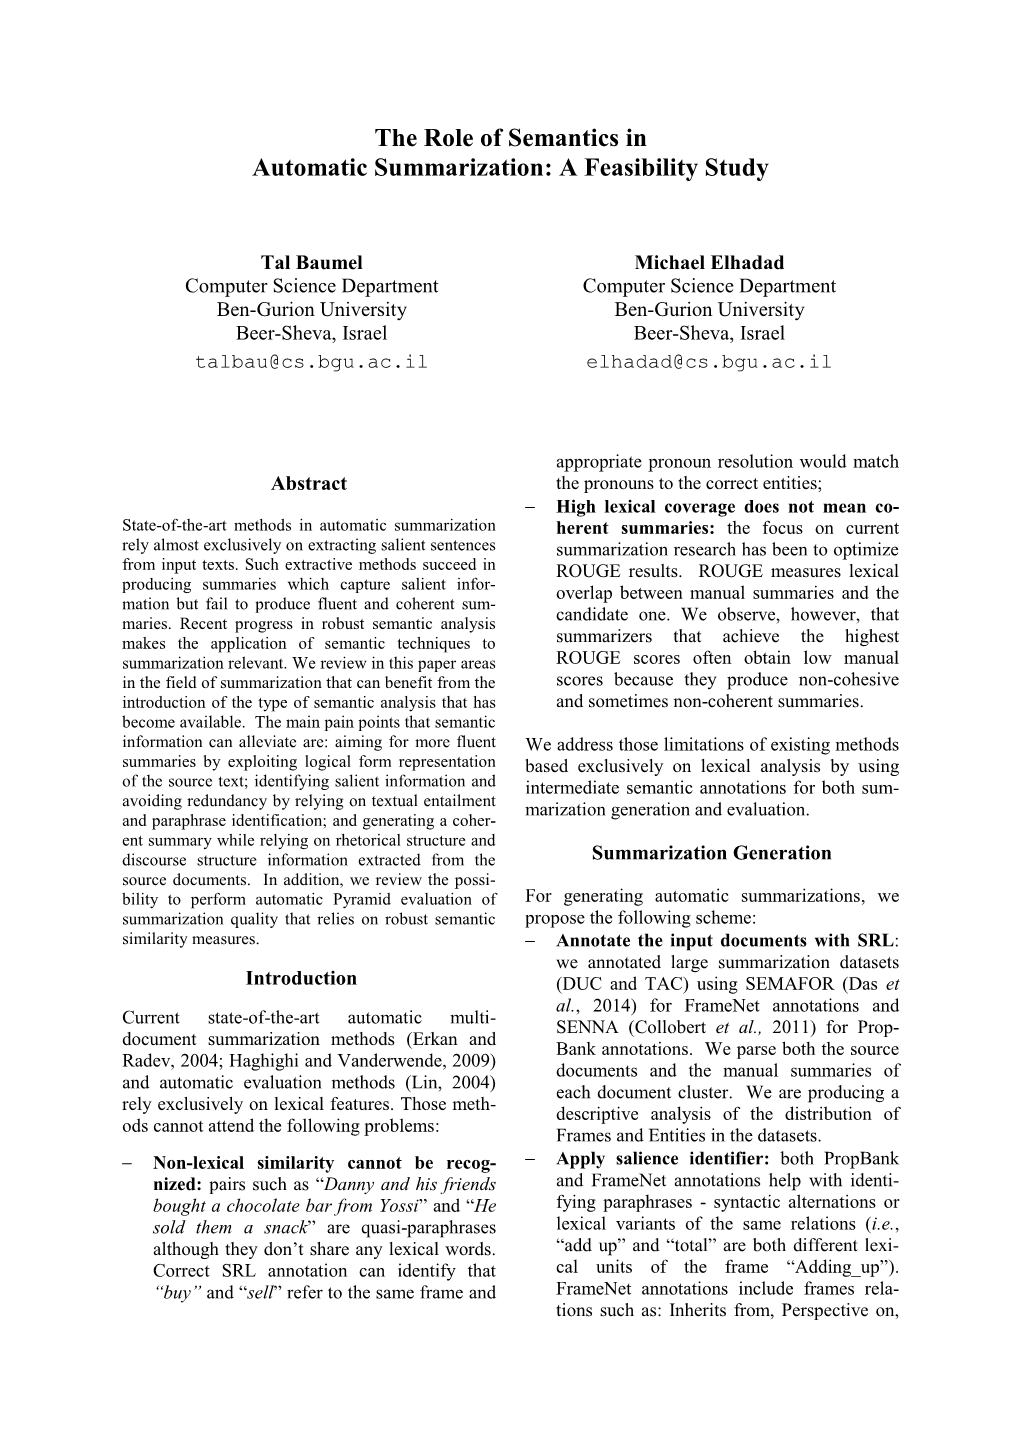 The Role of Semantics in Automatic Summarization: a Feasibility Study